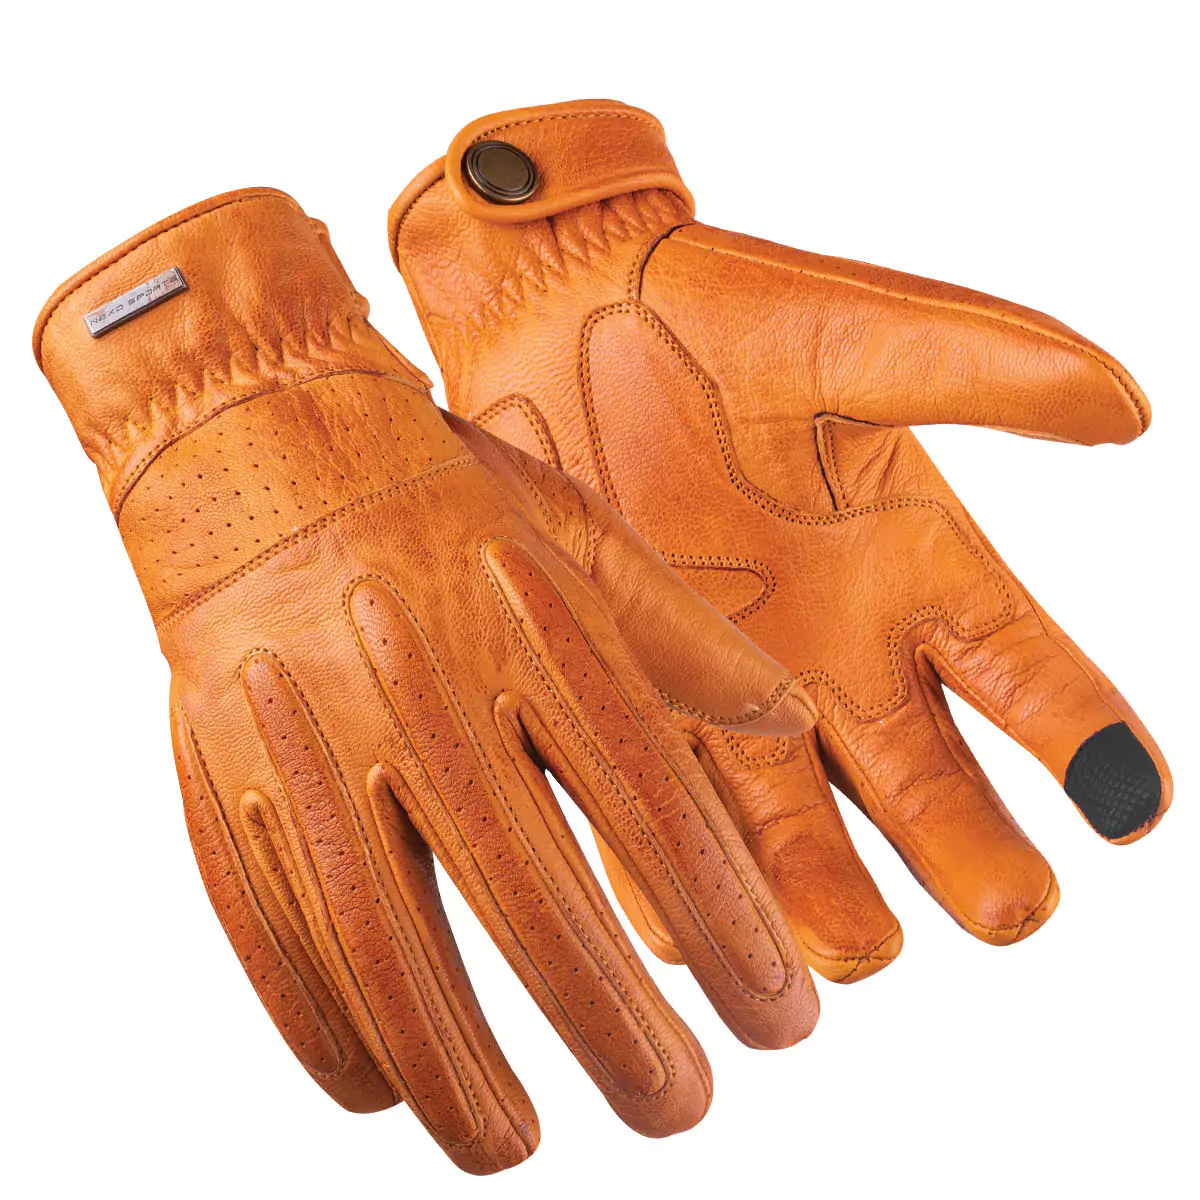 Motorbike summer gloves designed for warm weather riding with breathable materials.